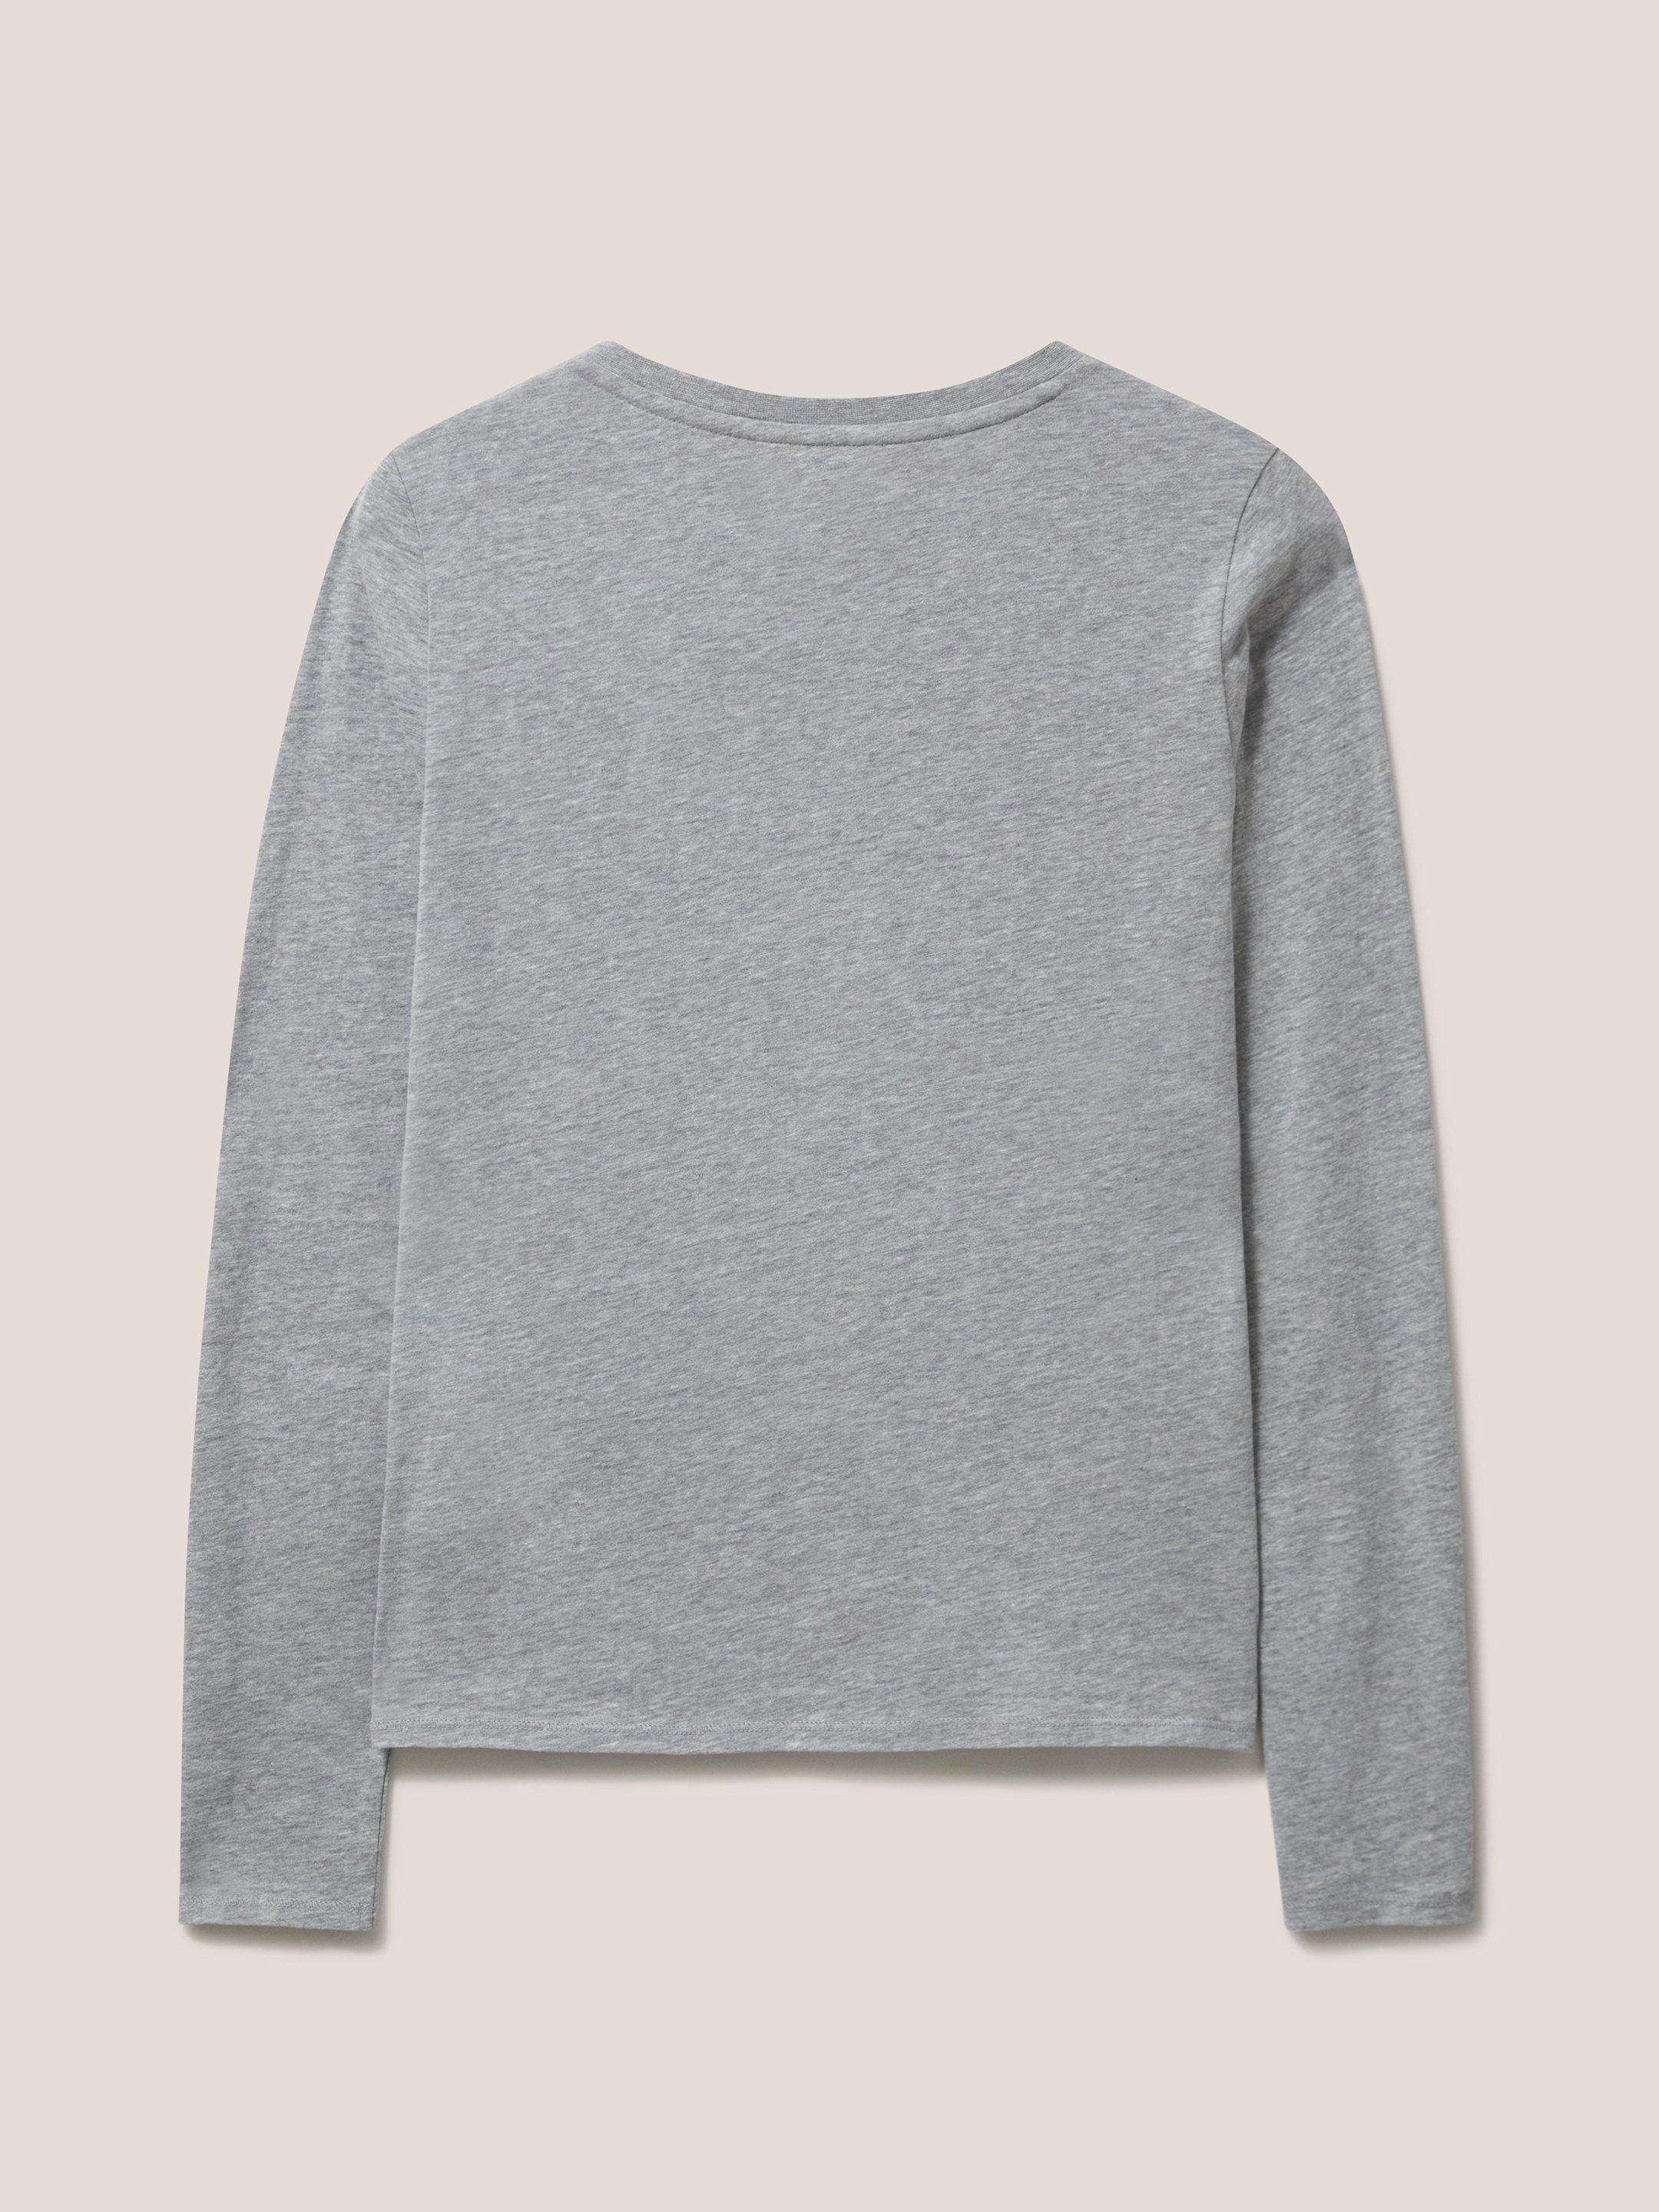 Camile Tee in MID GREY - FLAT BACK